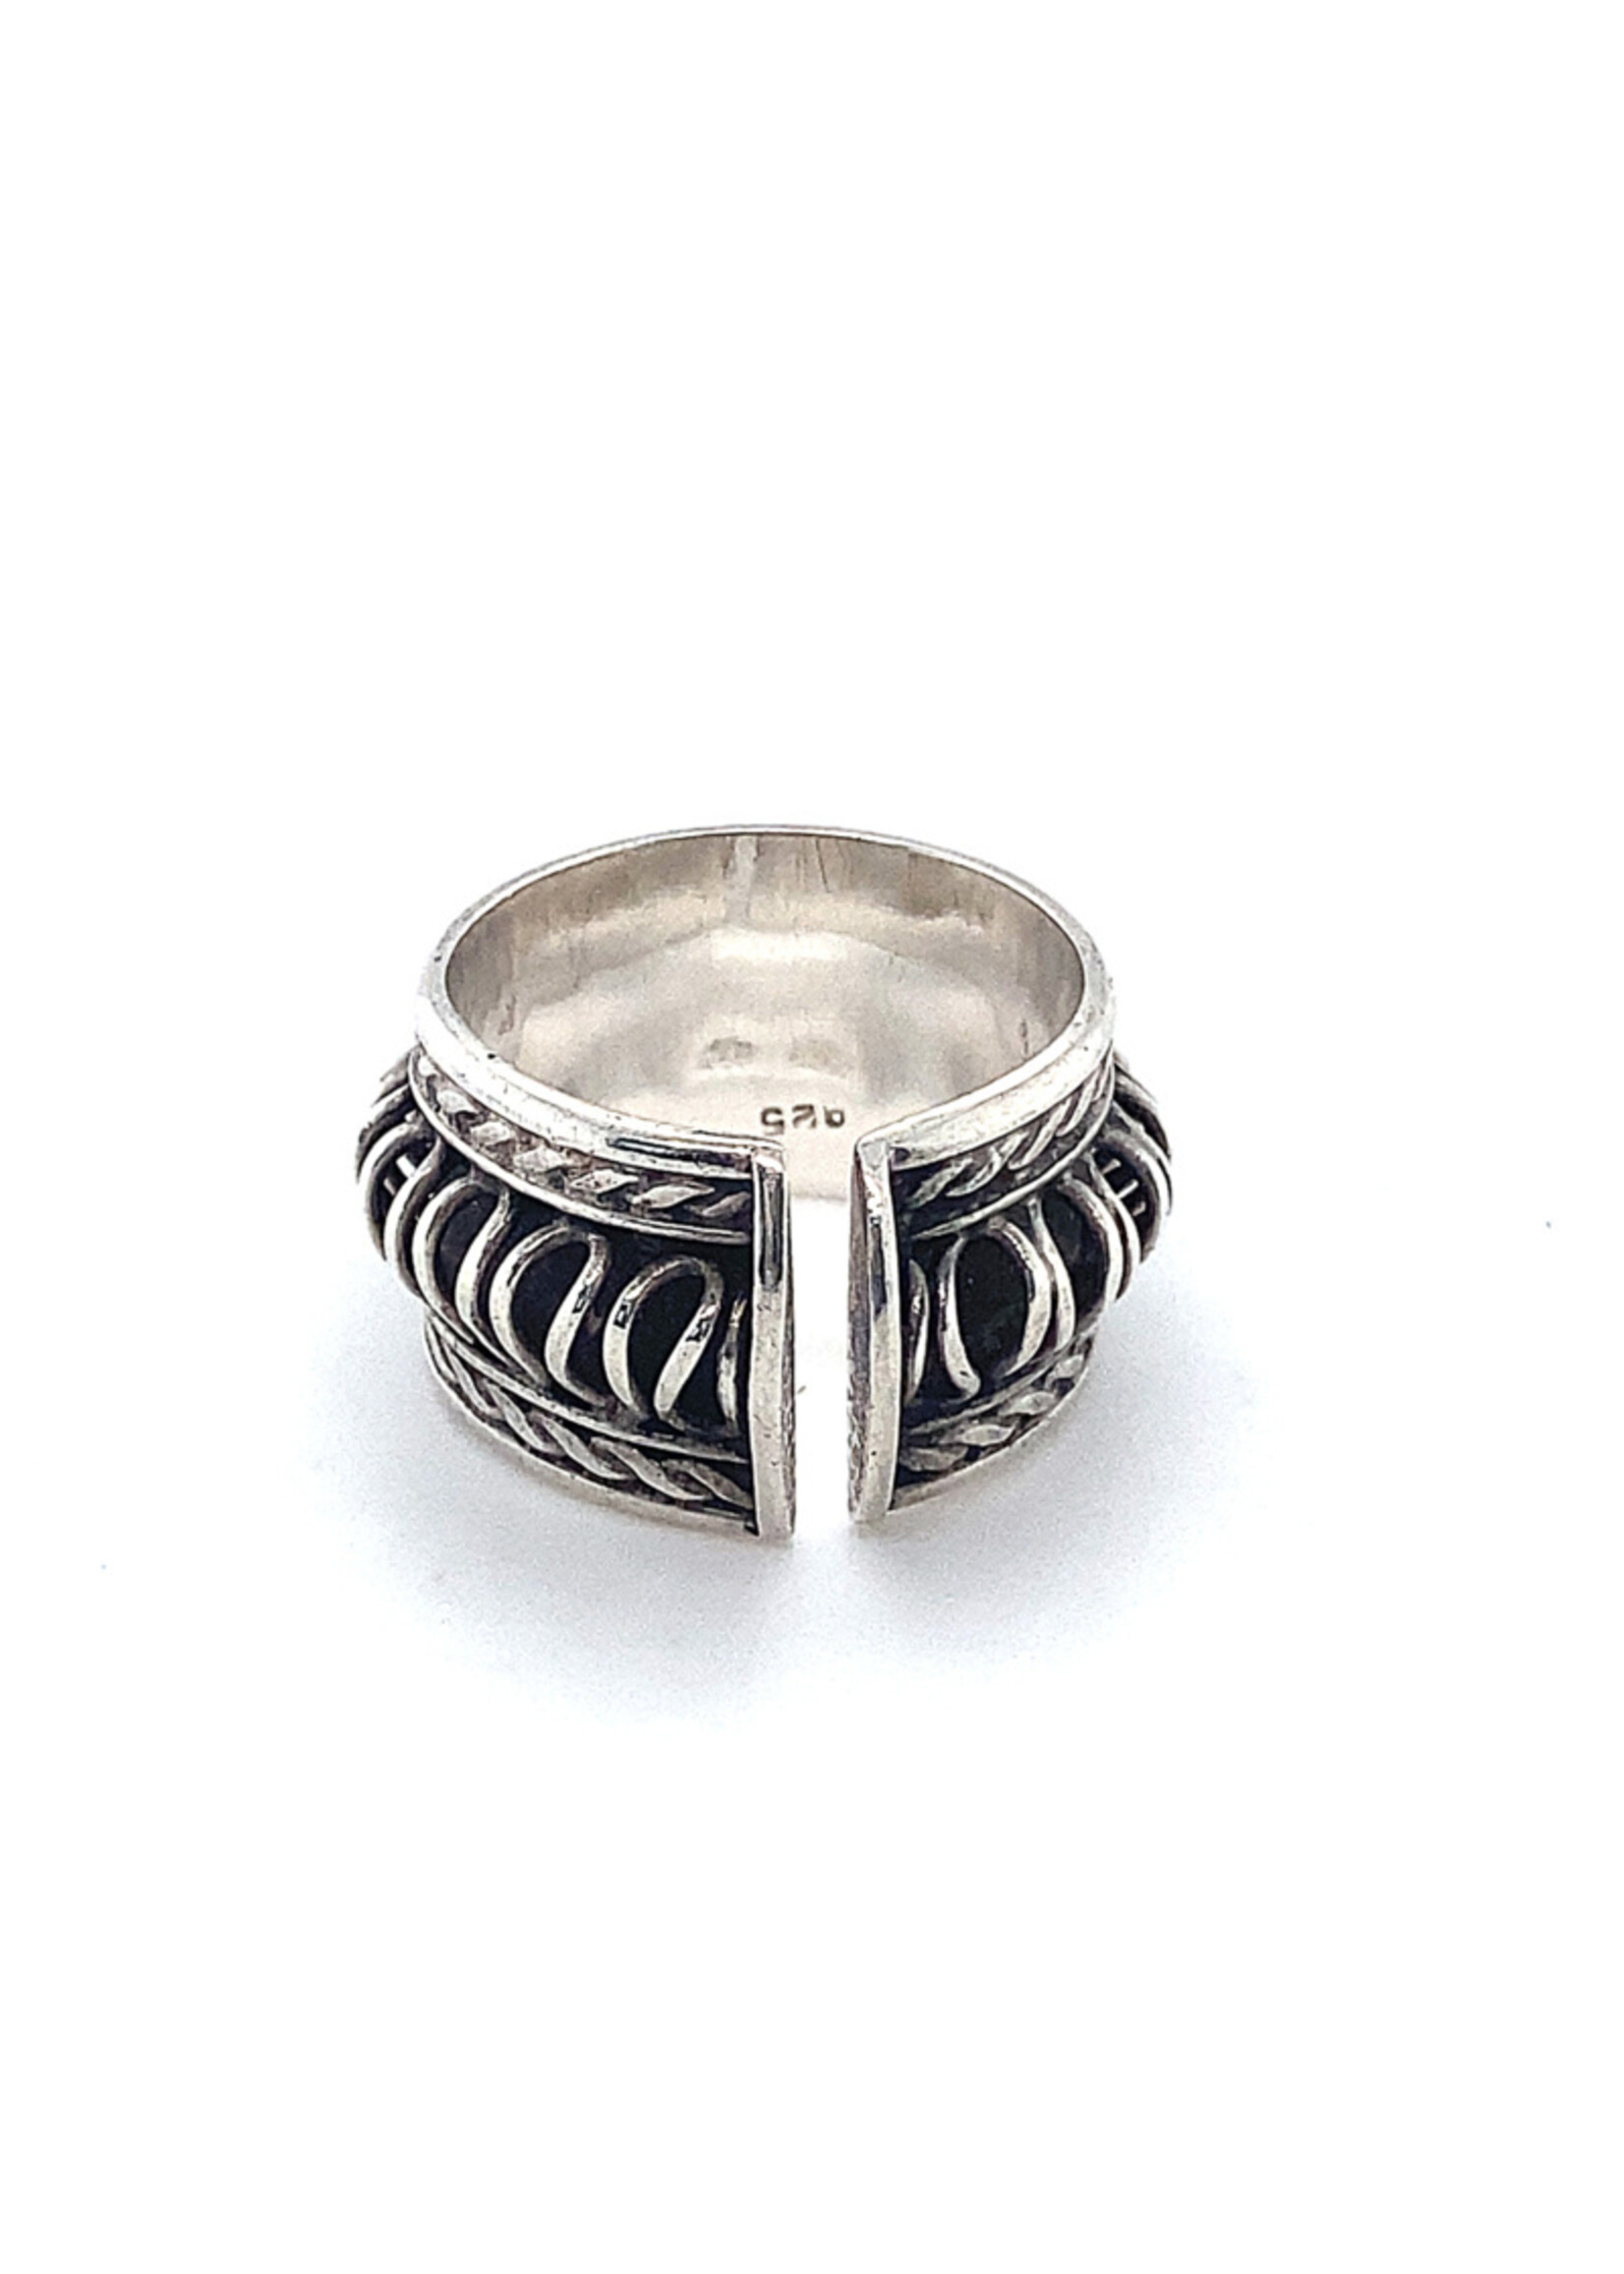 Vintage & Occasion Occasion brede geoxideerde ring